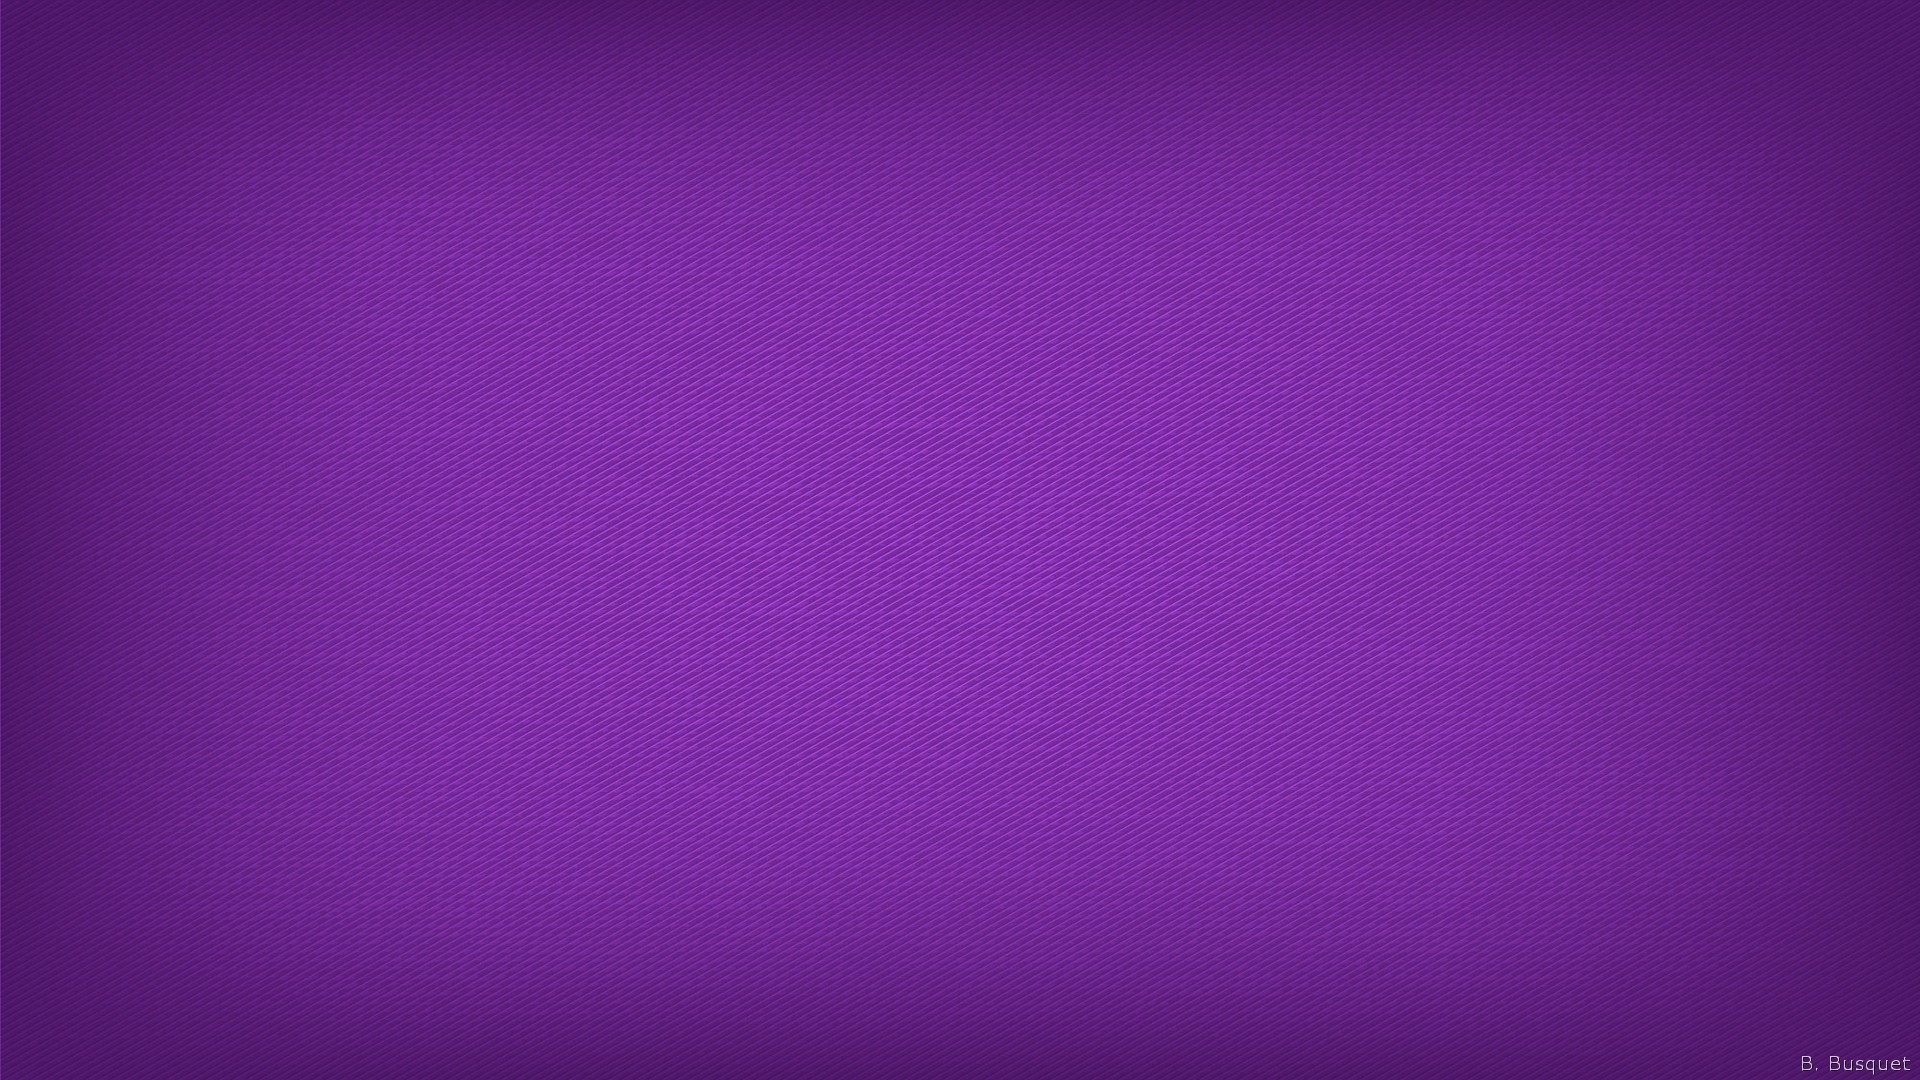 1920x1080 Simple wallpaper with weave pattern.